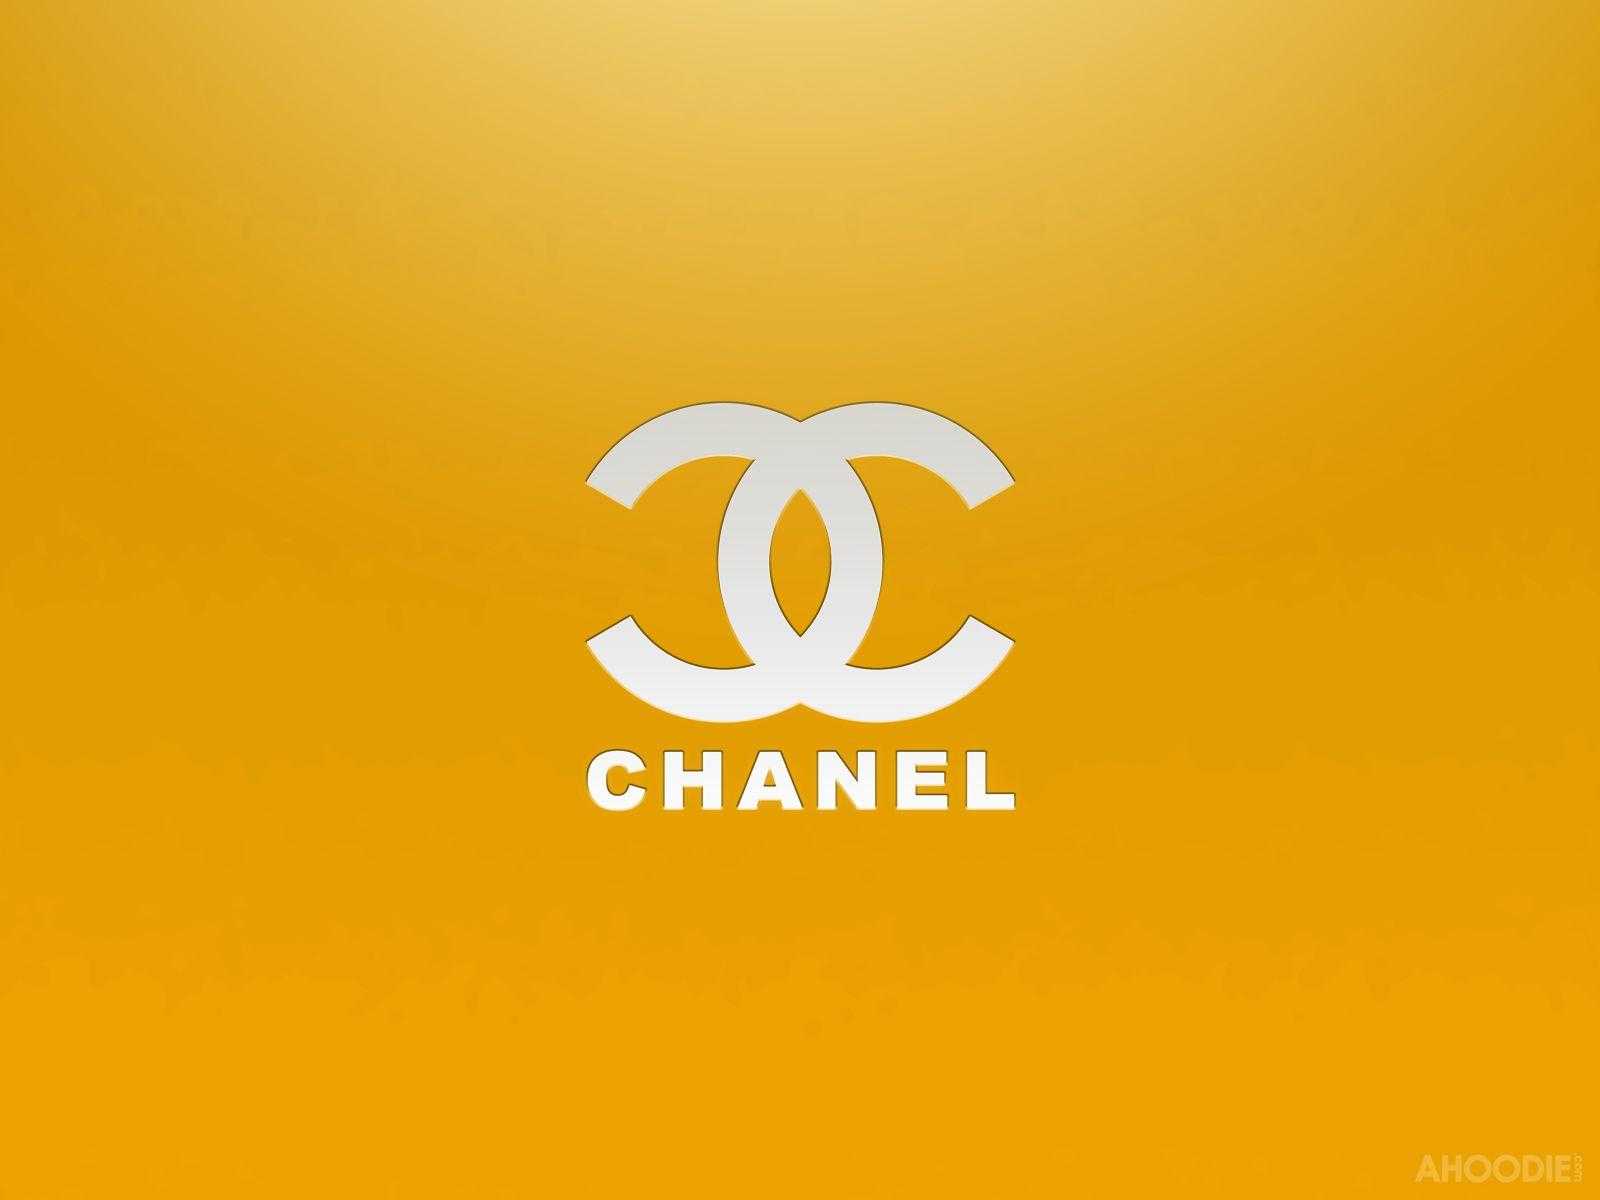 Featured image of post Coco Chanel Wallpaper Hd Download share or upload your own one